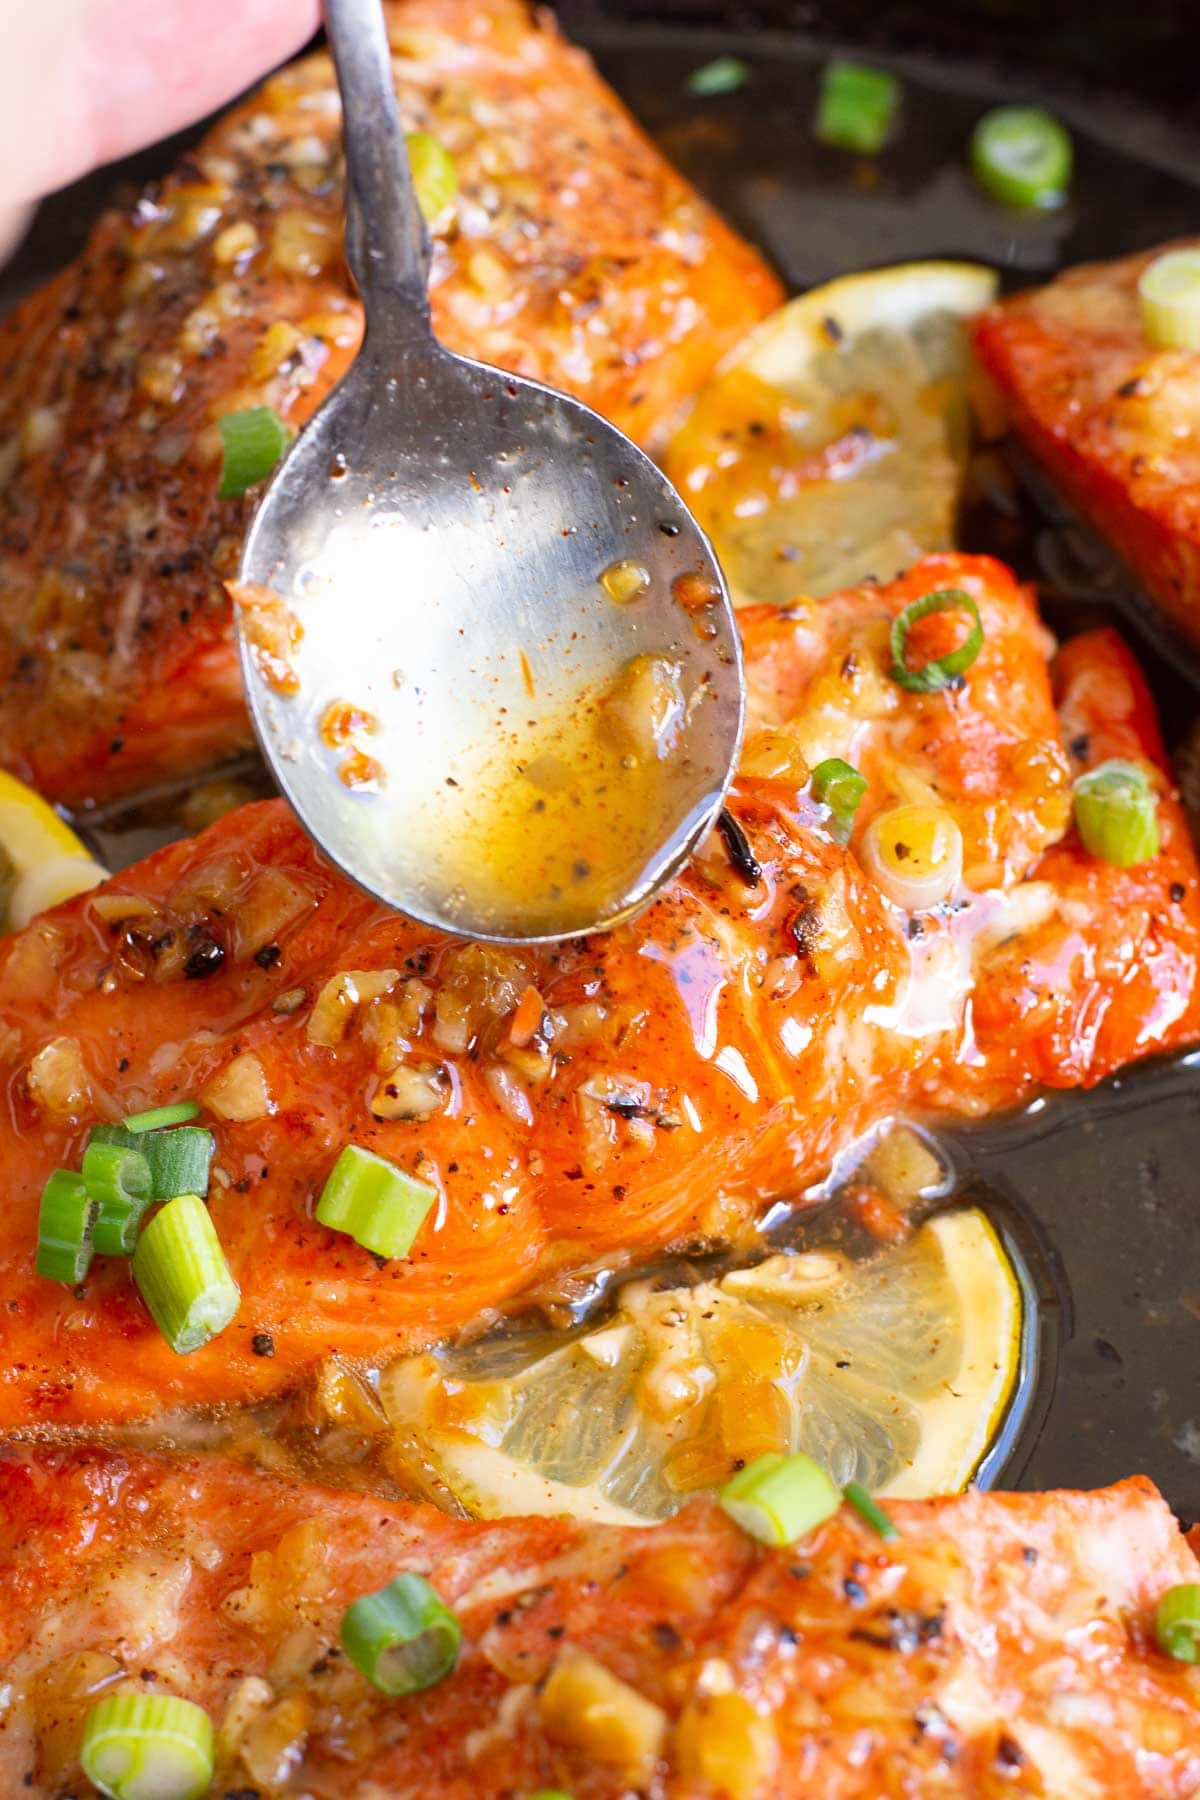 Pouring honey glaze with a spoon over a piece of salmon garnished with green onions.